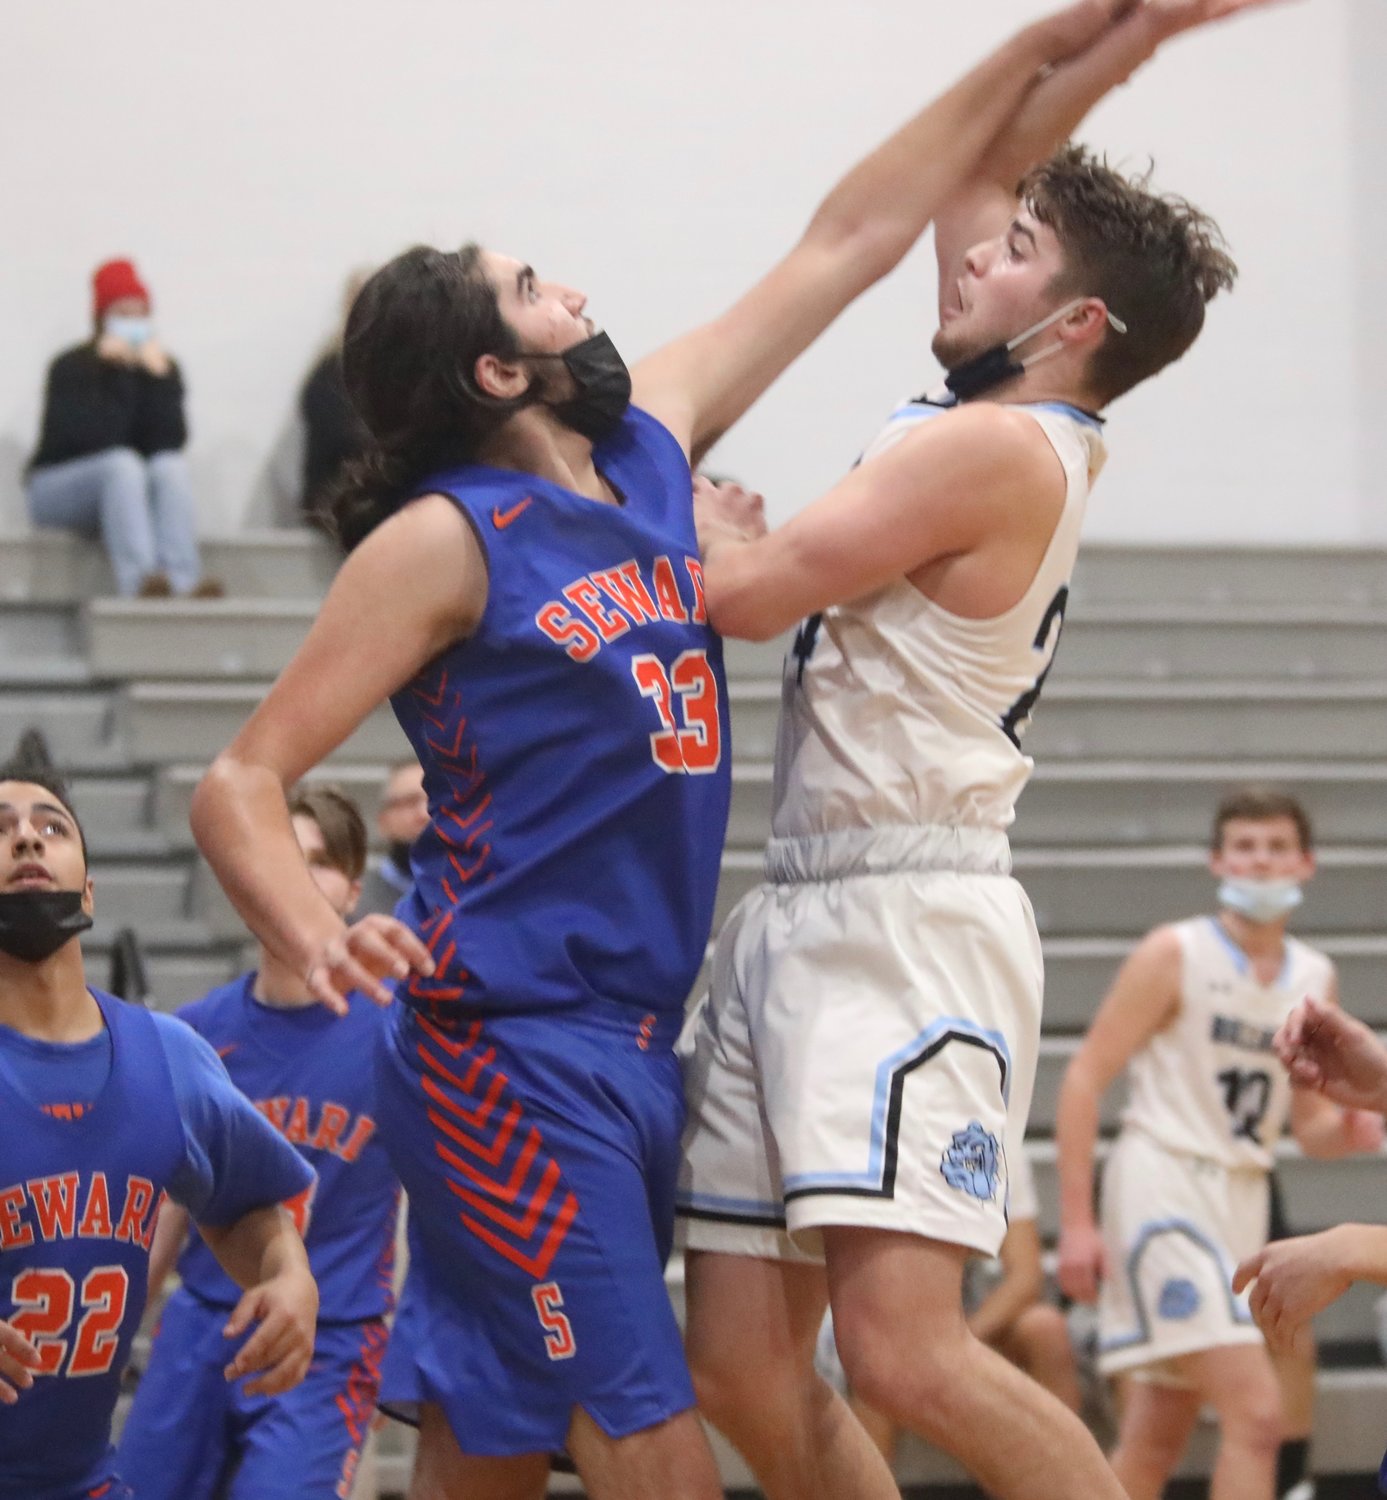 SW’s Dylan Sager came up big in the fourth quarter scoring all 12 of his points. Here he rises up and draws a foul from Seward’s Cole Buchalski.